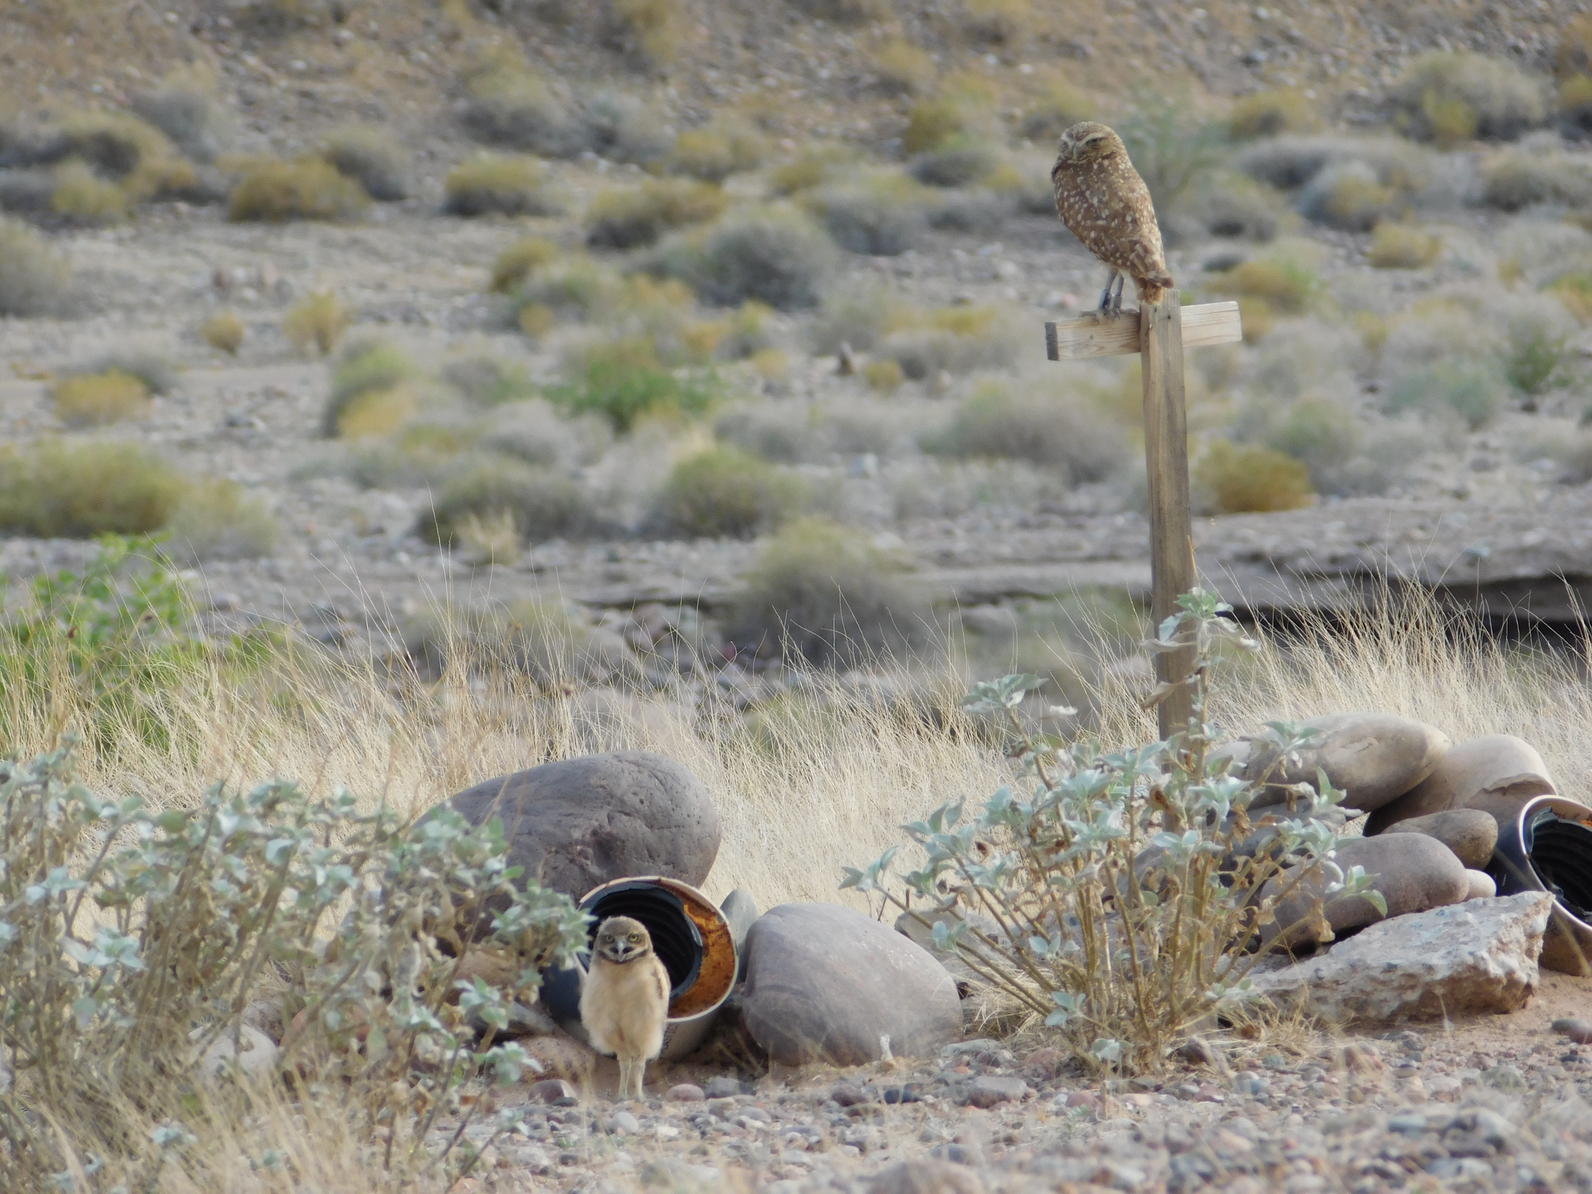 Burrowing Owl with young at an artificial nest in the Rio Salado.